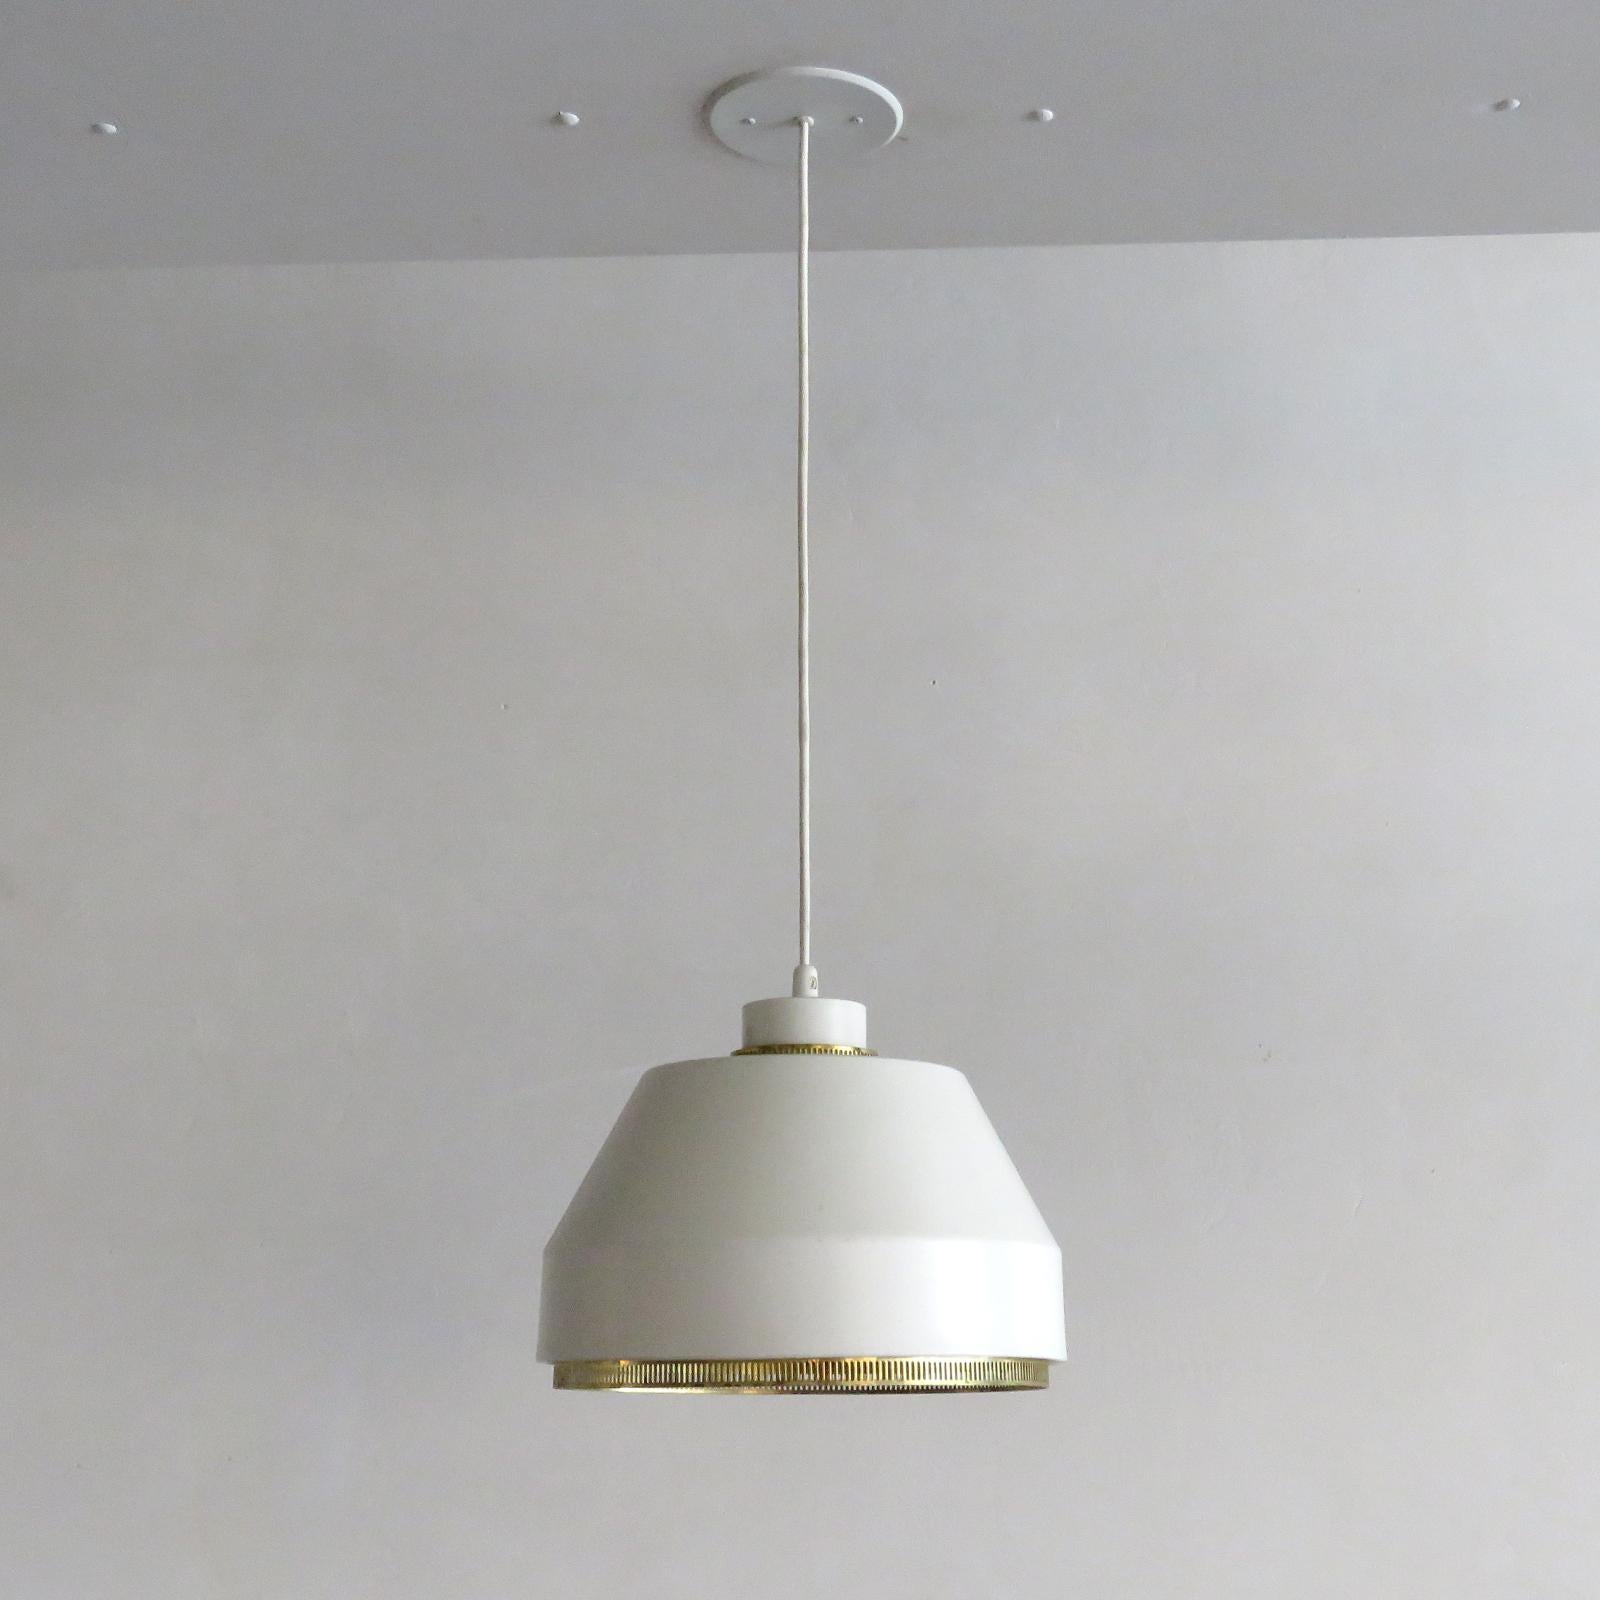 Wonderful pendant light, model AMA 500 by Aino Aalto, in white enameled metal with lattice brass accents, early example by original manufacture Valaistustyö Ky, Finland, 1941, marked, overall drop of 41